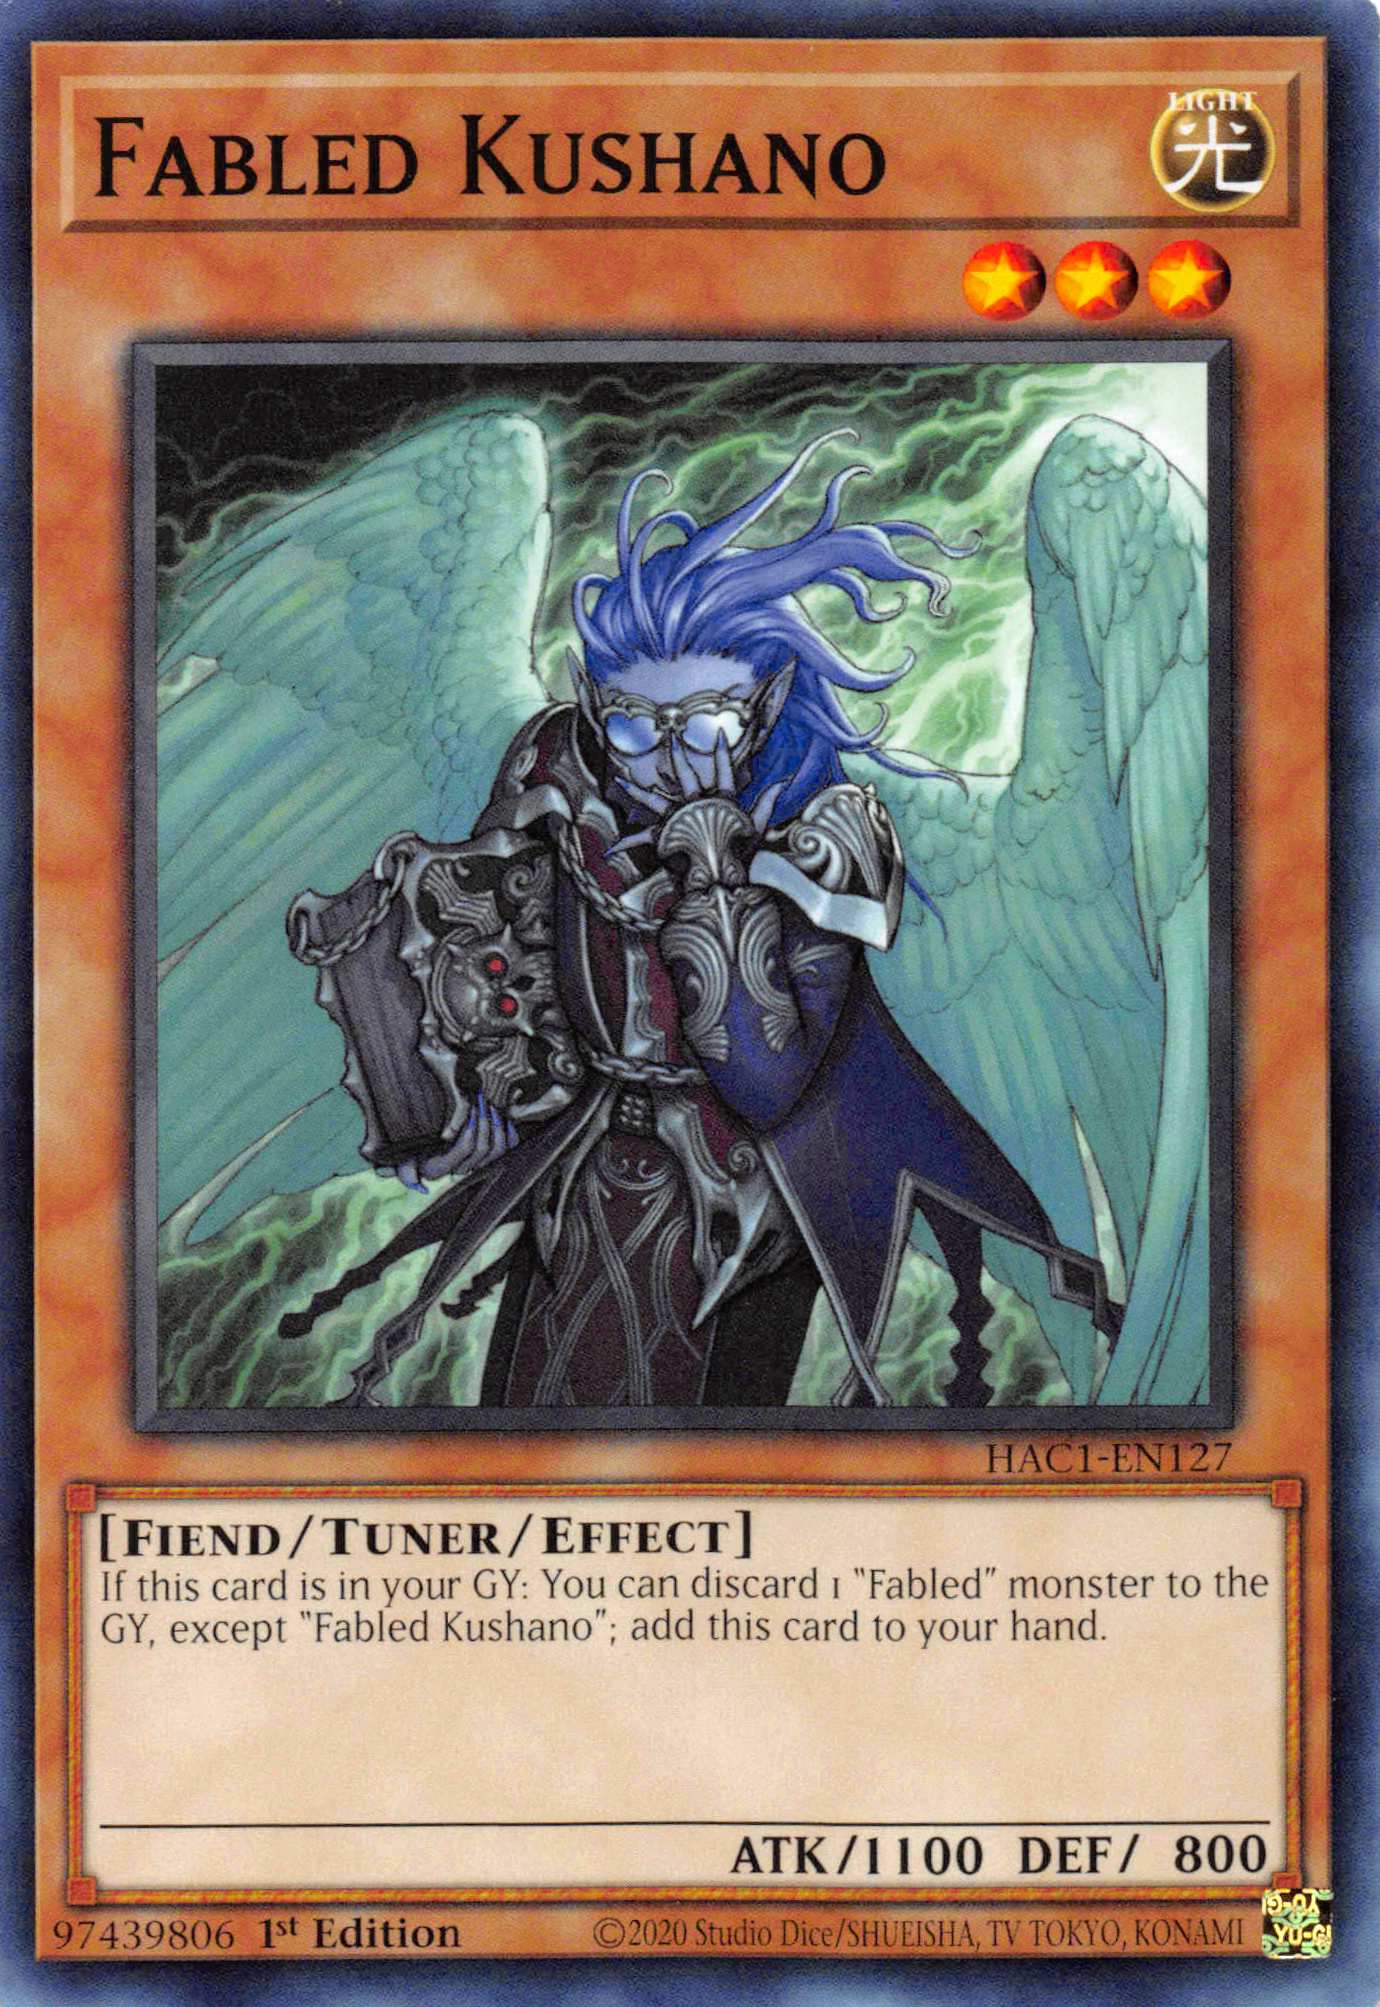 Fabled Kushano [HAC1-EN127] Common | Total Play